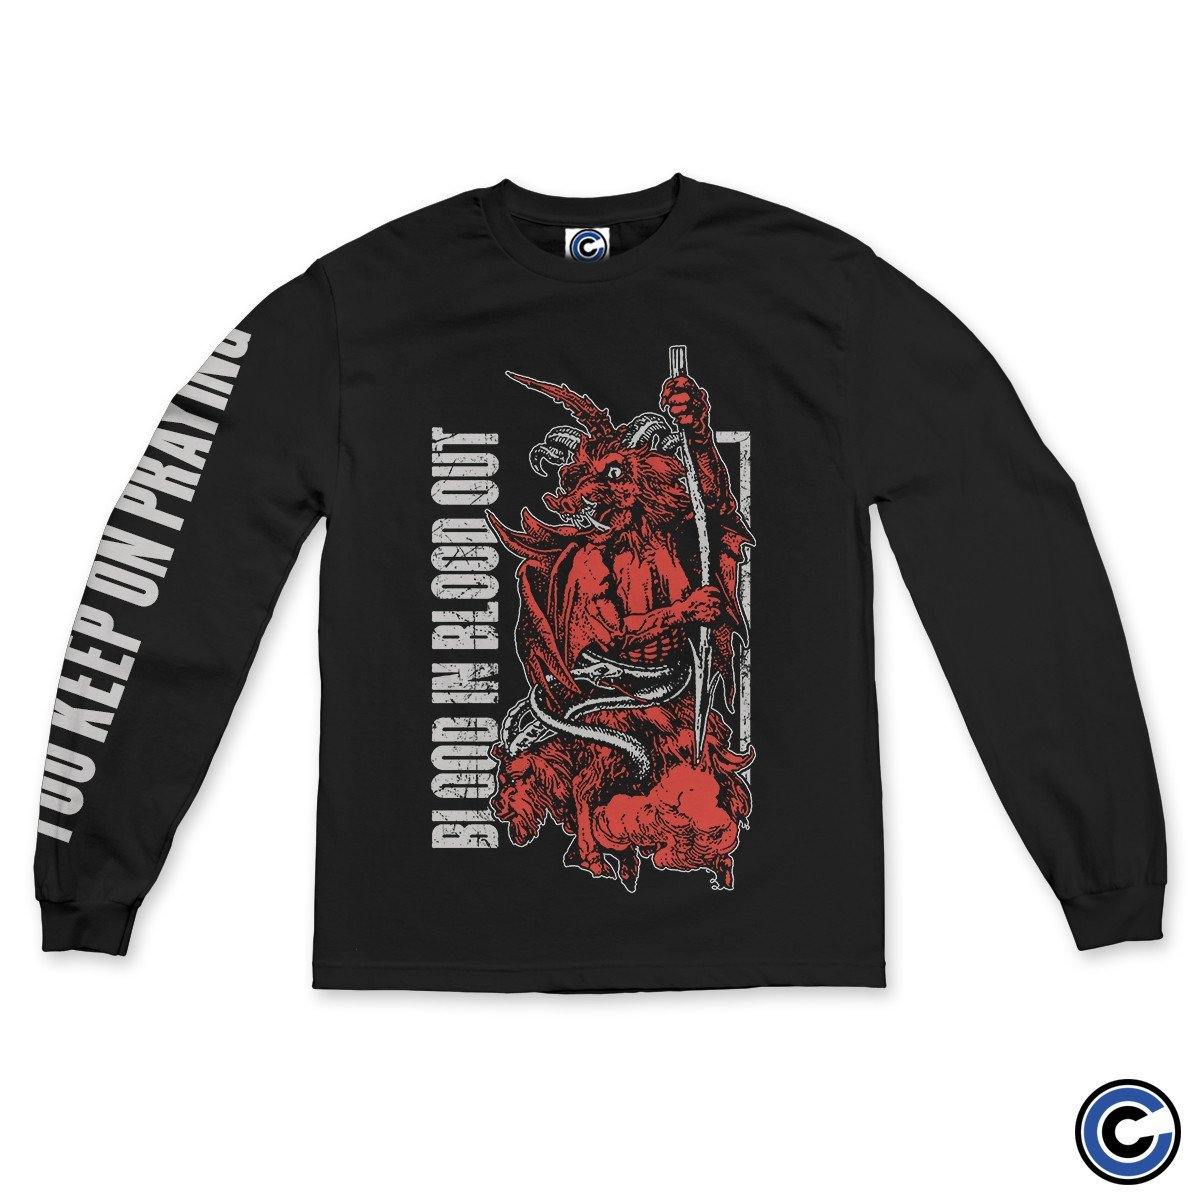 Buy – Blood In Blood Out "Sacrifice" Long Sleeve – Band & Music Merch – Cold Cuts Merch